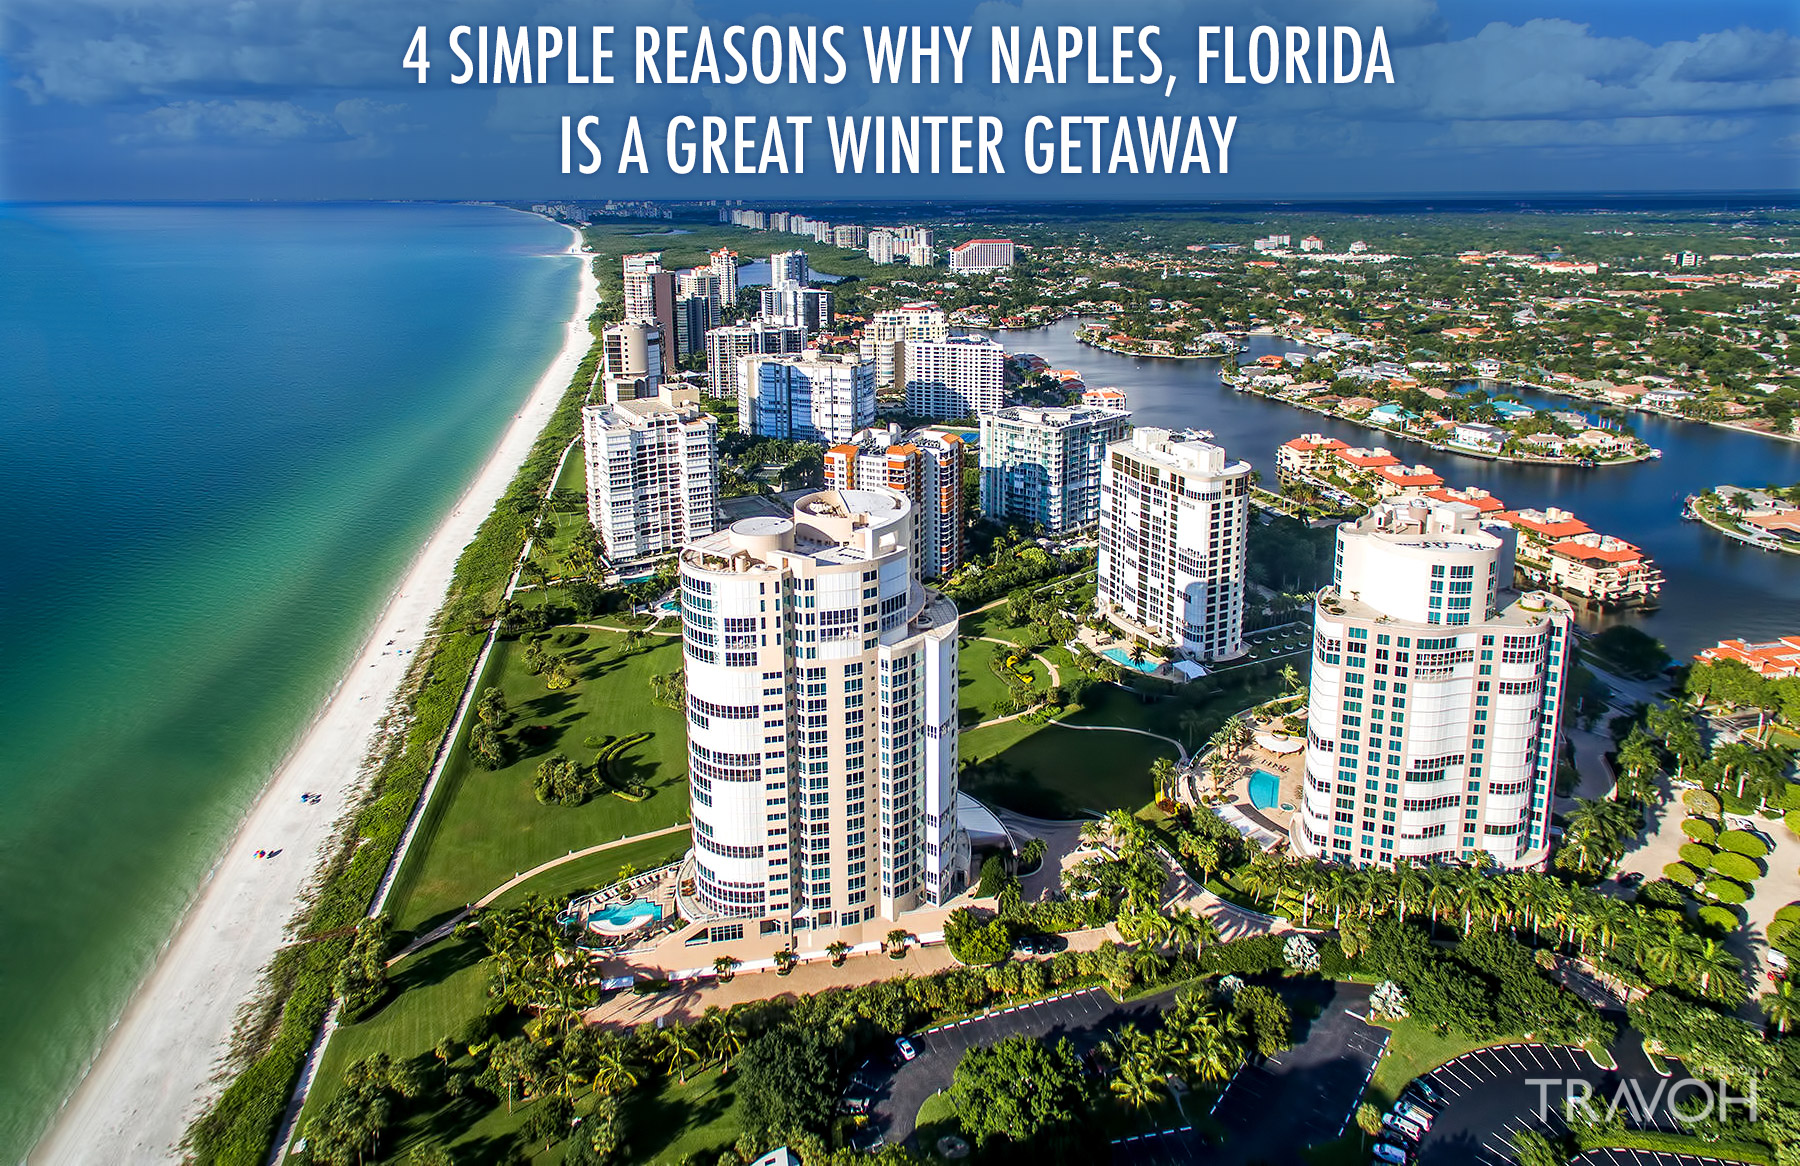 4 Simple Reasons Why Naples, Florida is a Great Winter Getaway